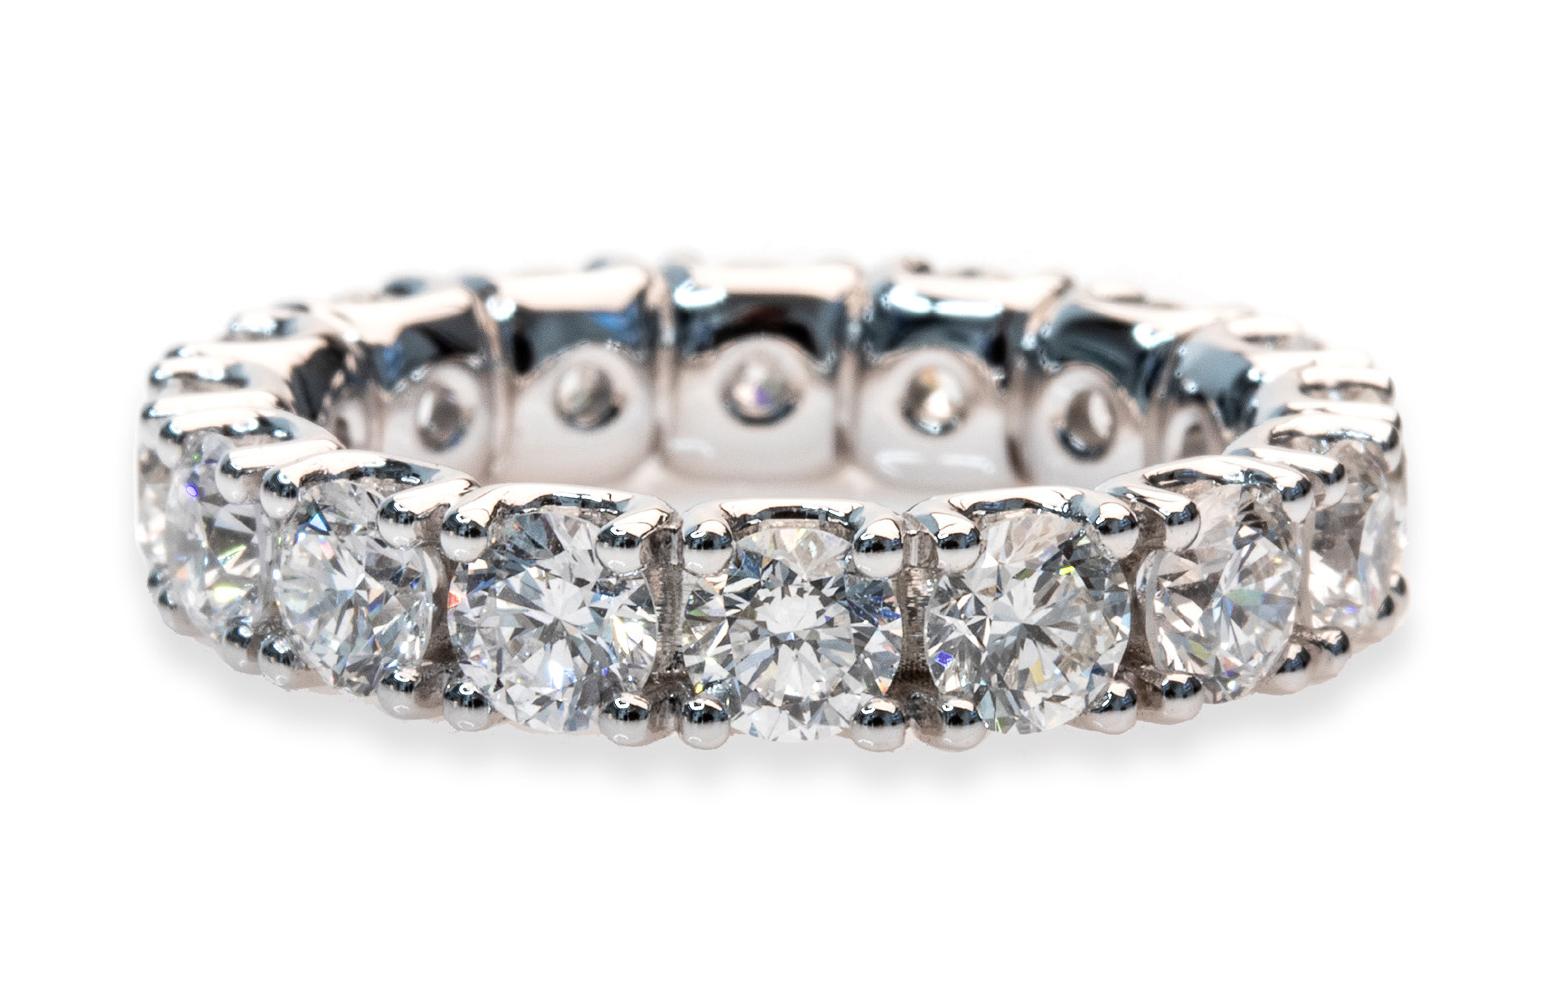 This stunning ring is an Eternity Band, beautifully handcrafted in Italy with a total carat weight of 4.20 carats. The band is made of lustrous 18K white gold, showcasing a series of round diamonds seamlessly set around the entire circumference. The